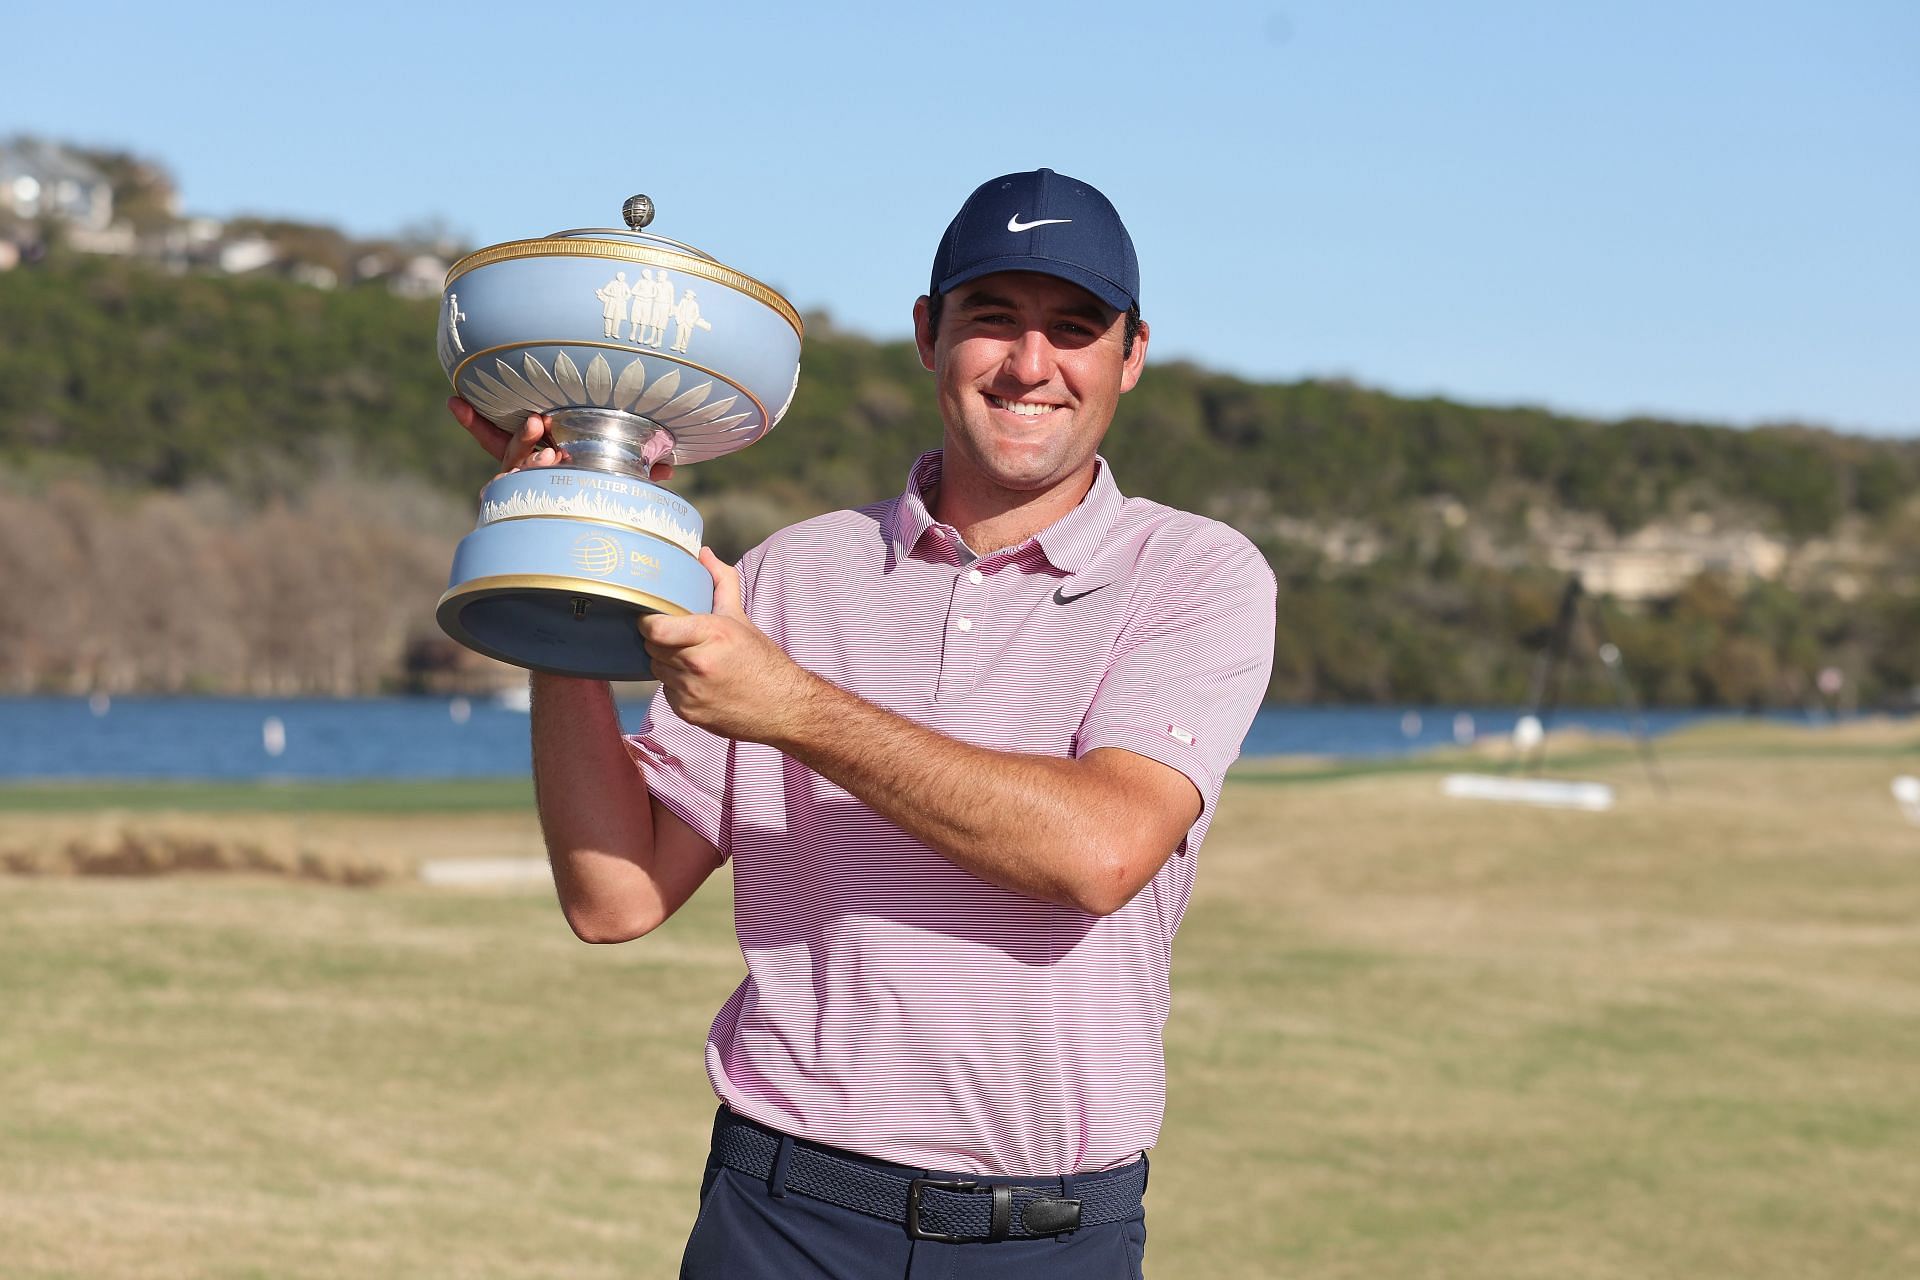 Scottie Scheffler poses with the Walter Hagen Cup after defeating Kevin Kisner 4&amp;3 in their finals match to win the World Golf Championships-Dell Technologies Match Play